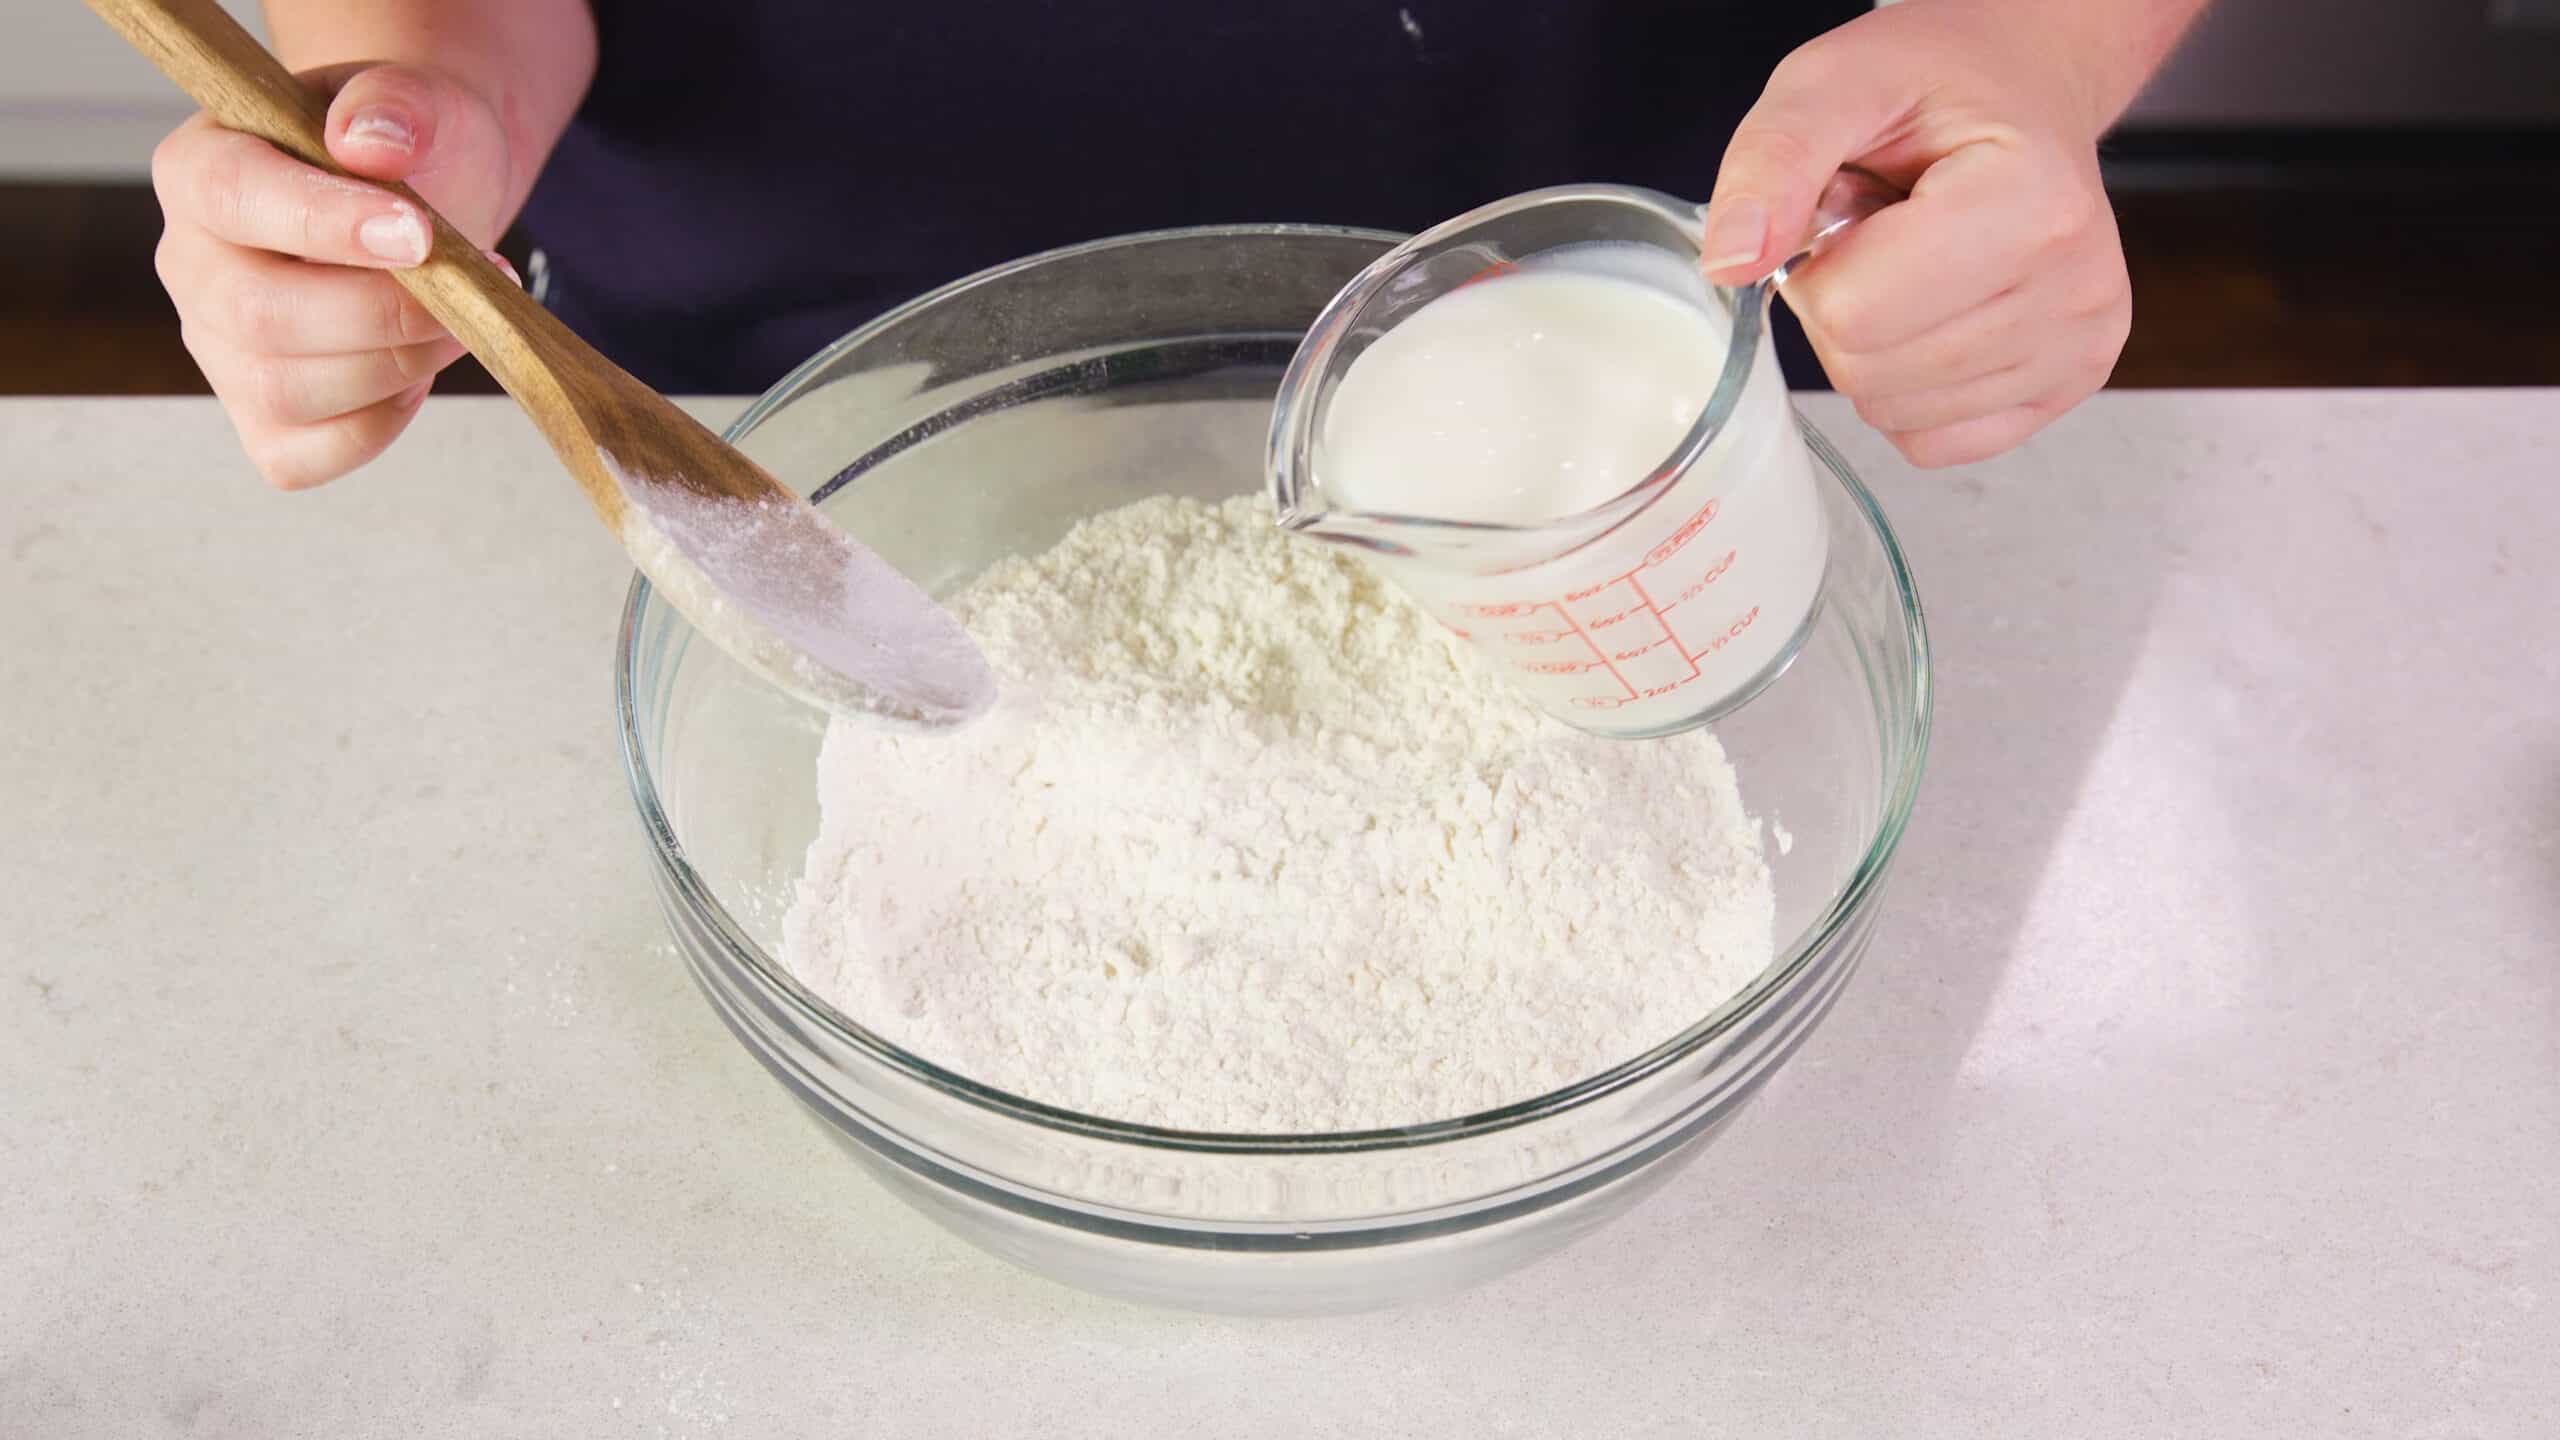 Angled view of mixed ingredients in a mixing bowl on countertop with a wooden spoon in hand and a measuring cup of buttermilk in the other hand ready to pour.